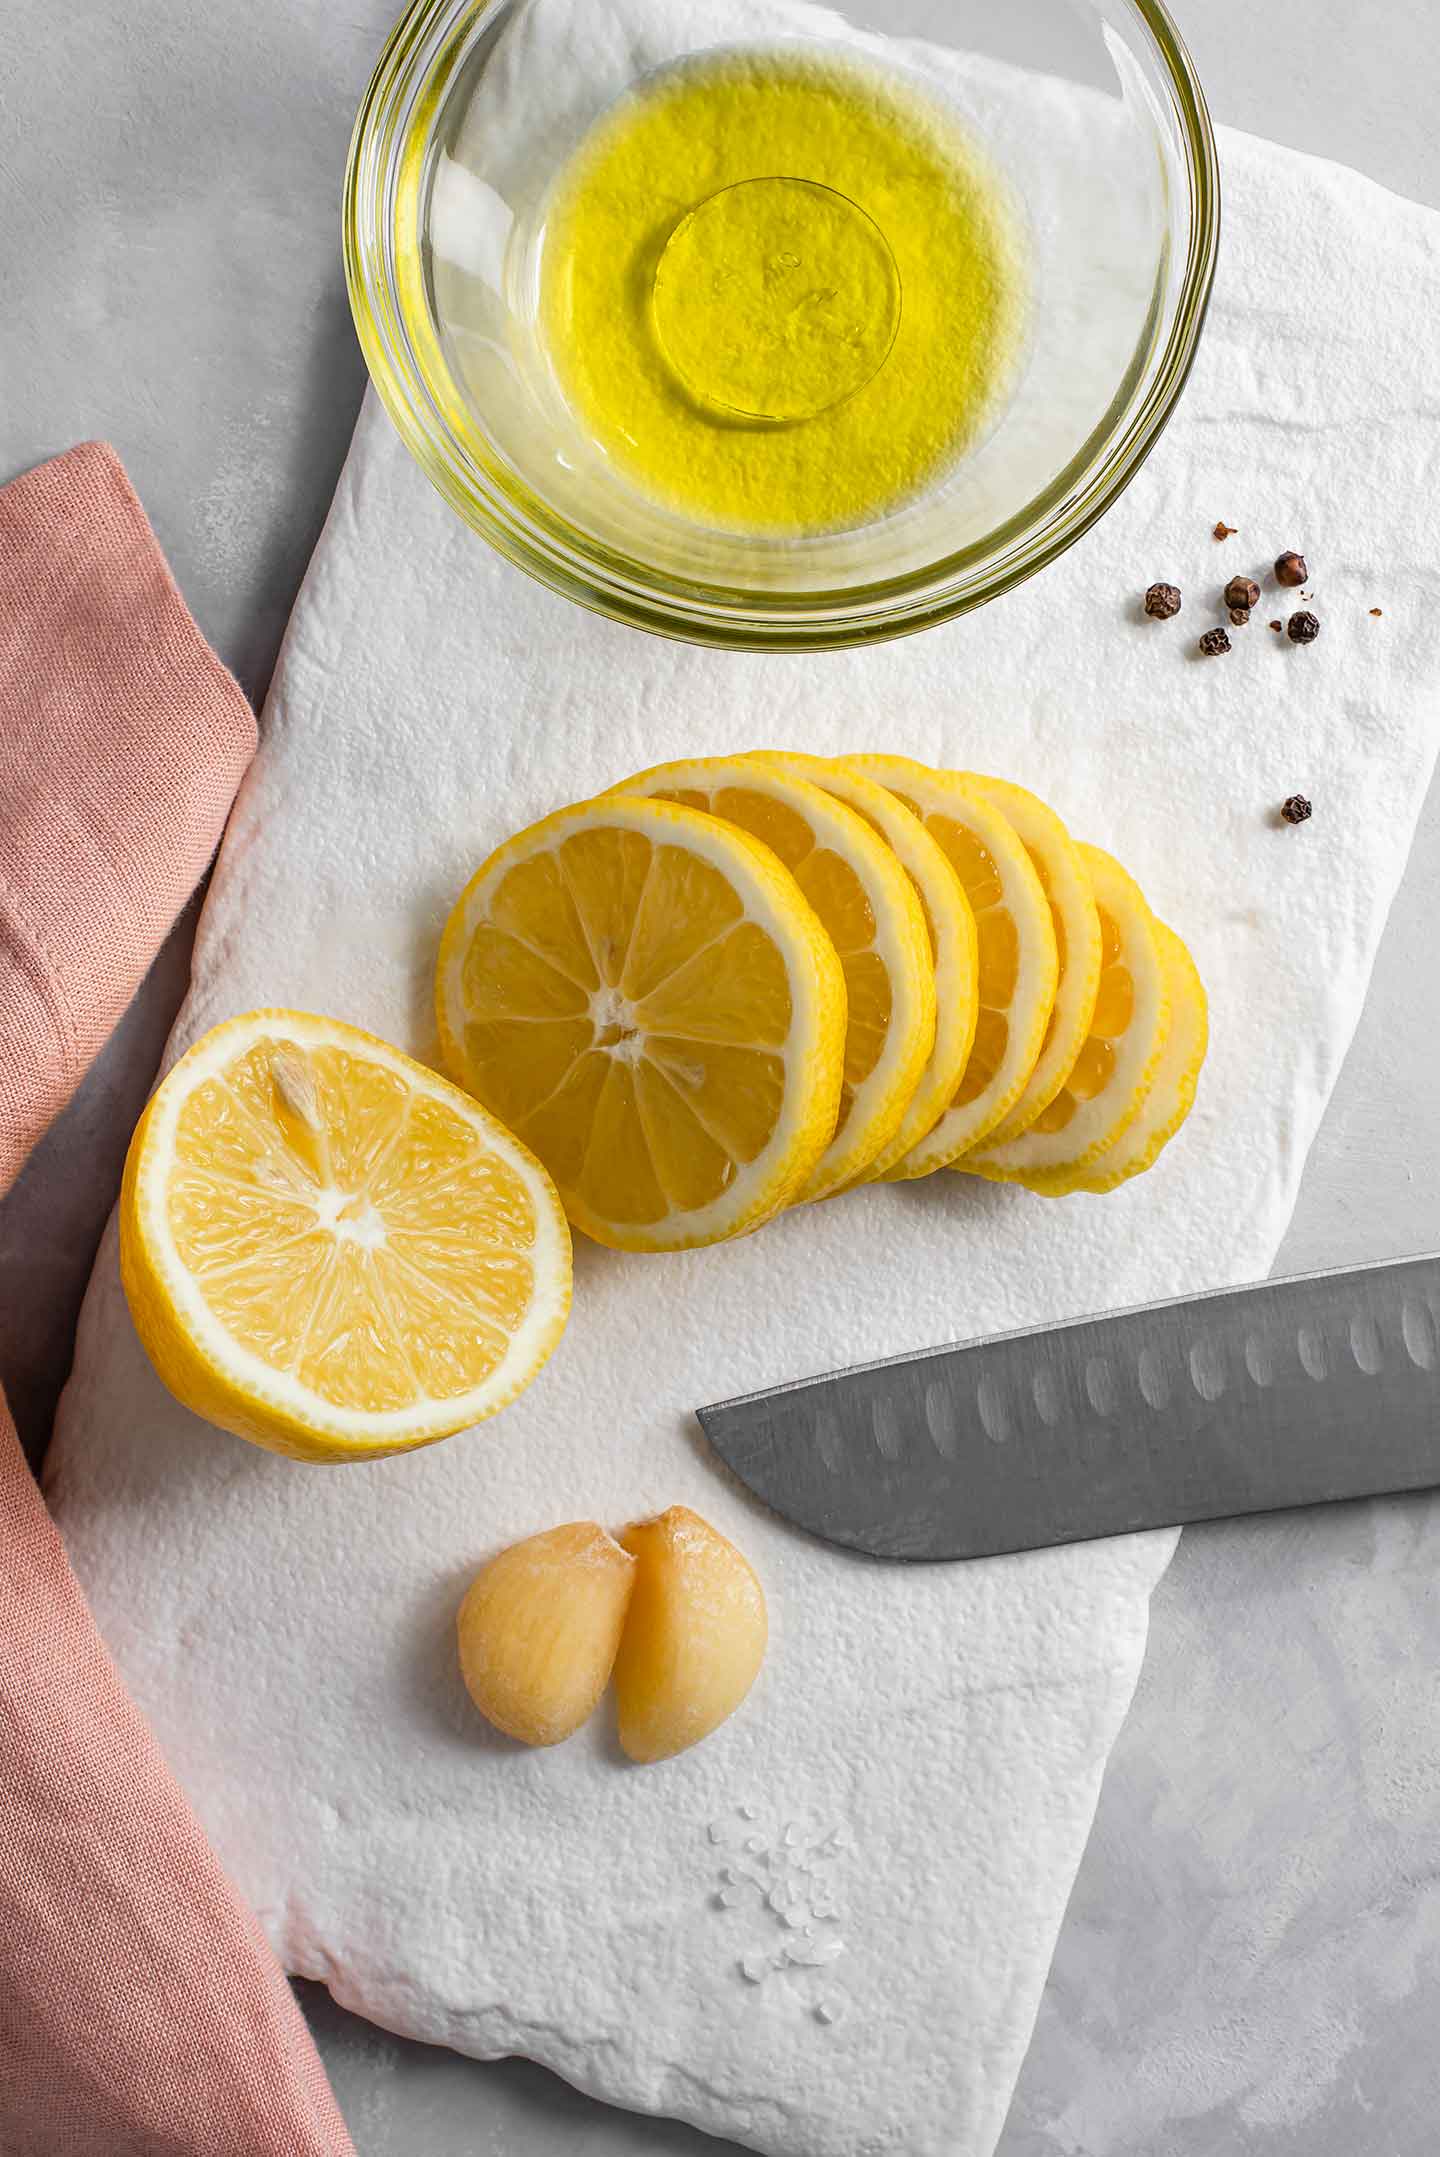 Top down view of thinly sliced lemon on a white tray with olive oil in a small jar, garlic cloves, and coarse salt and peppercorns.